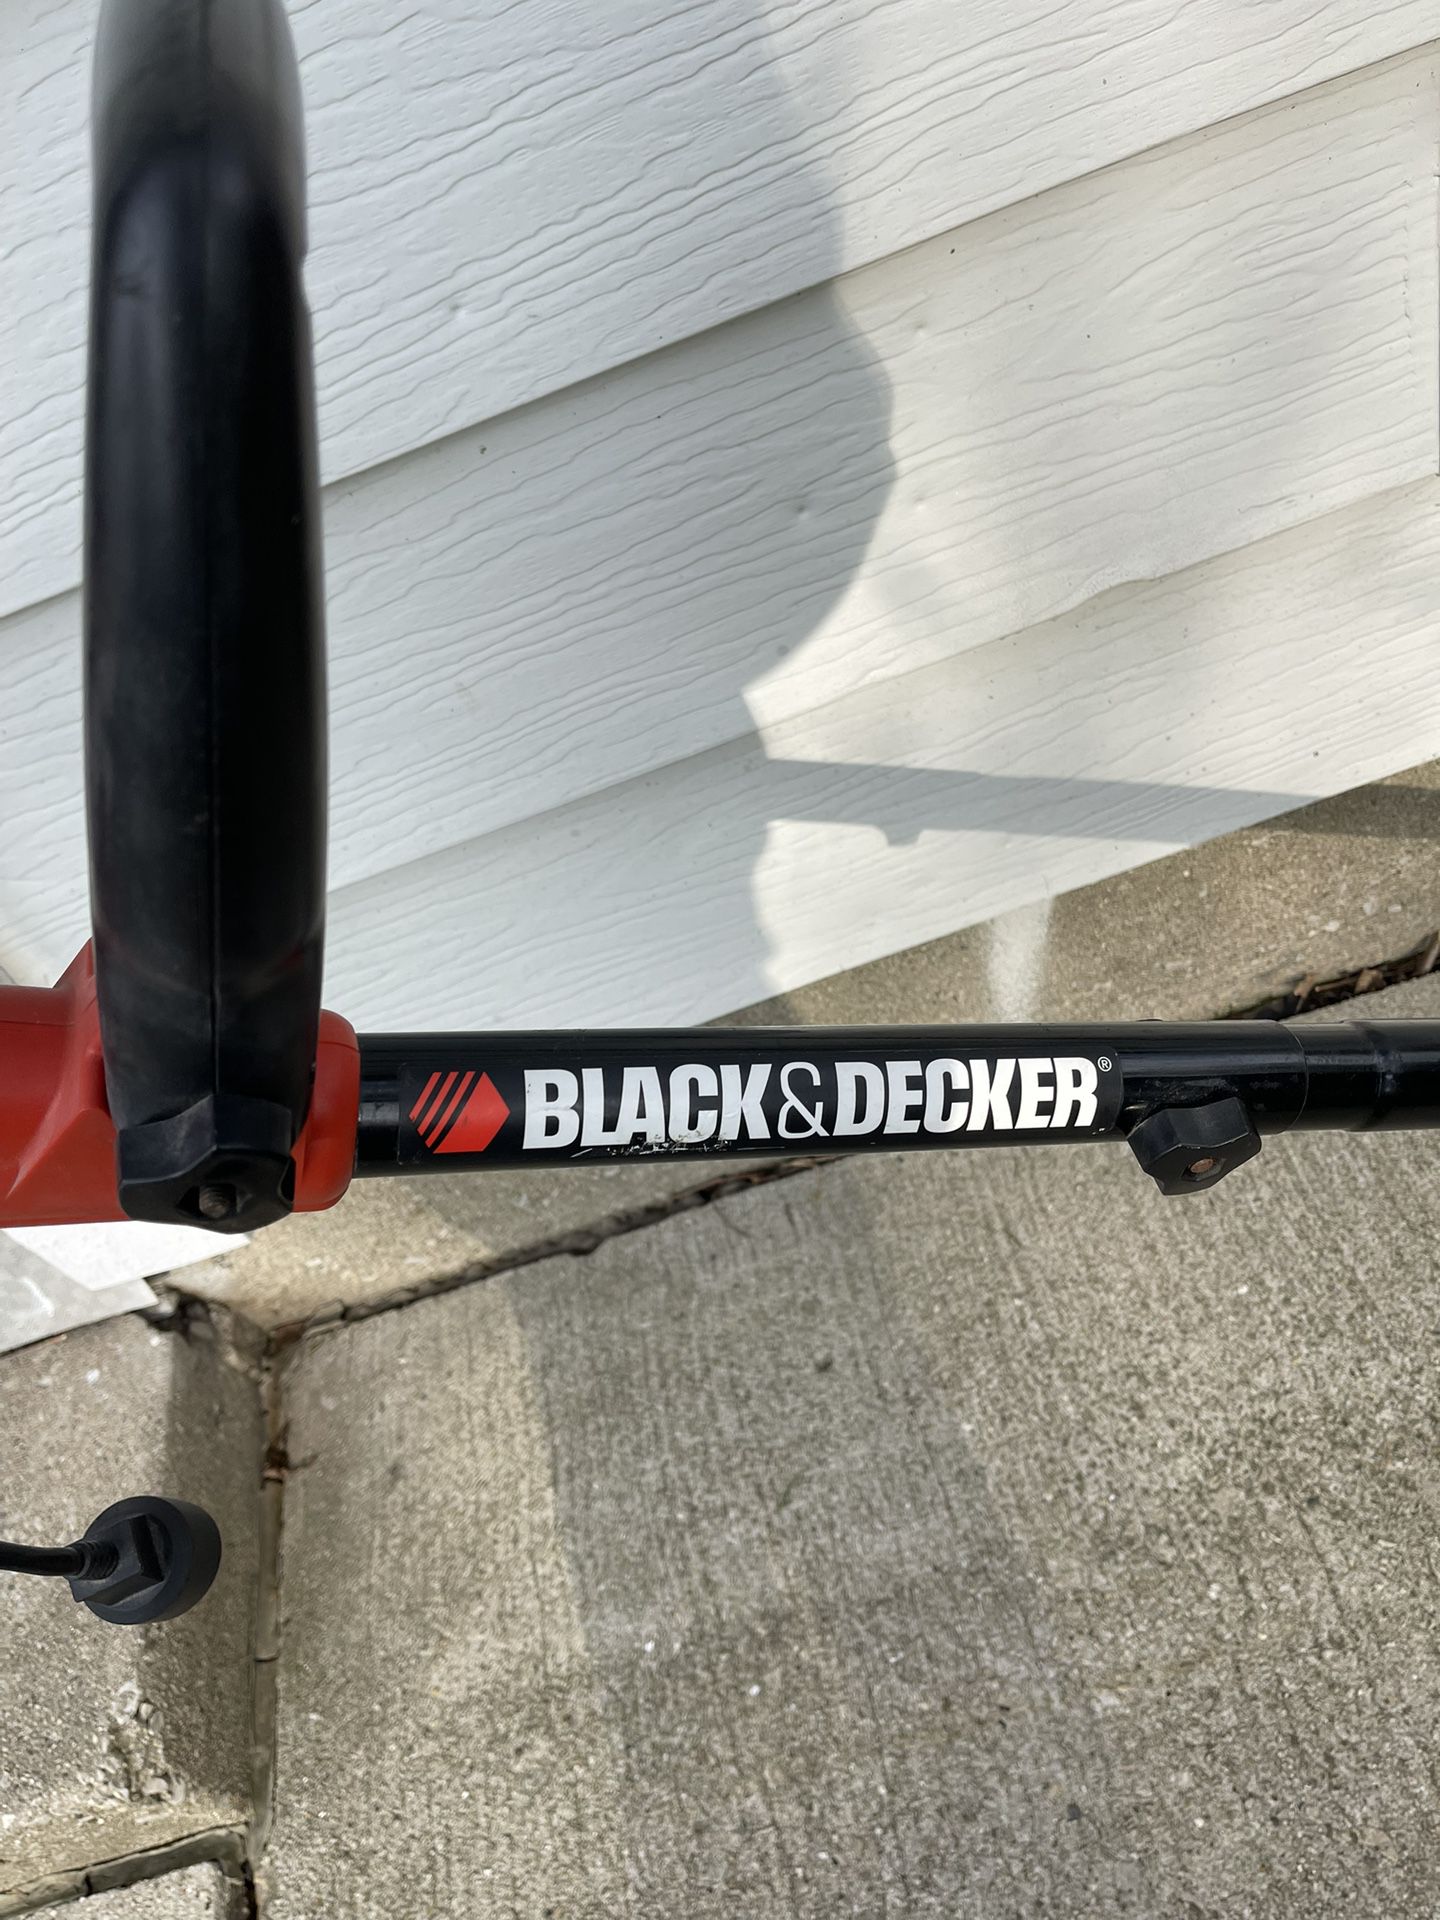 BLACK+DECKER Edger & Trencher, 2-in-1, 12-Amp (LE750) …ALSO, Take A Look At  My Other Items.! for Sale in Lyons, IL - OfferUp